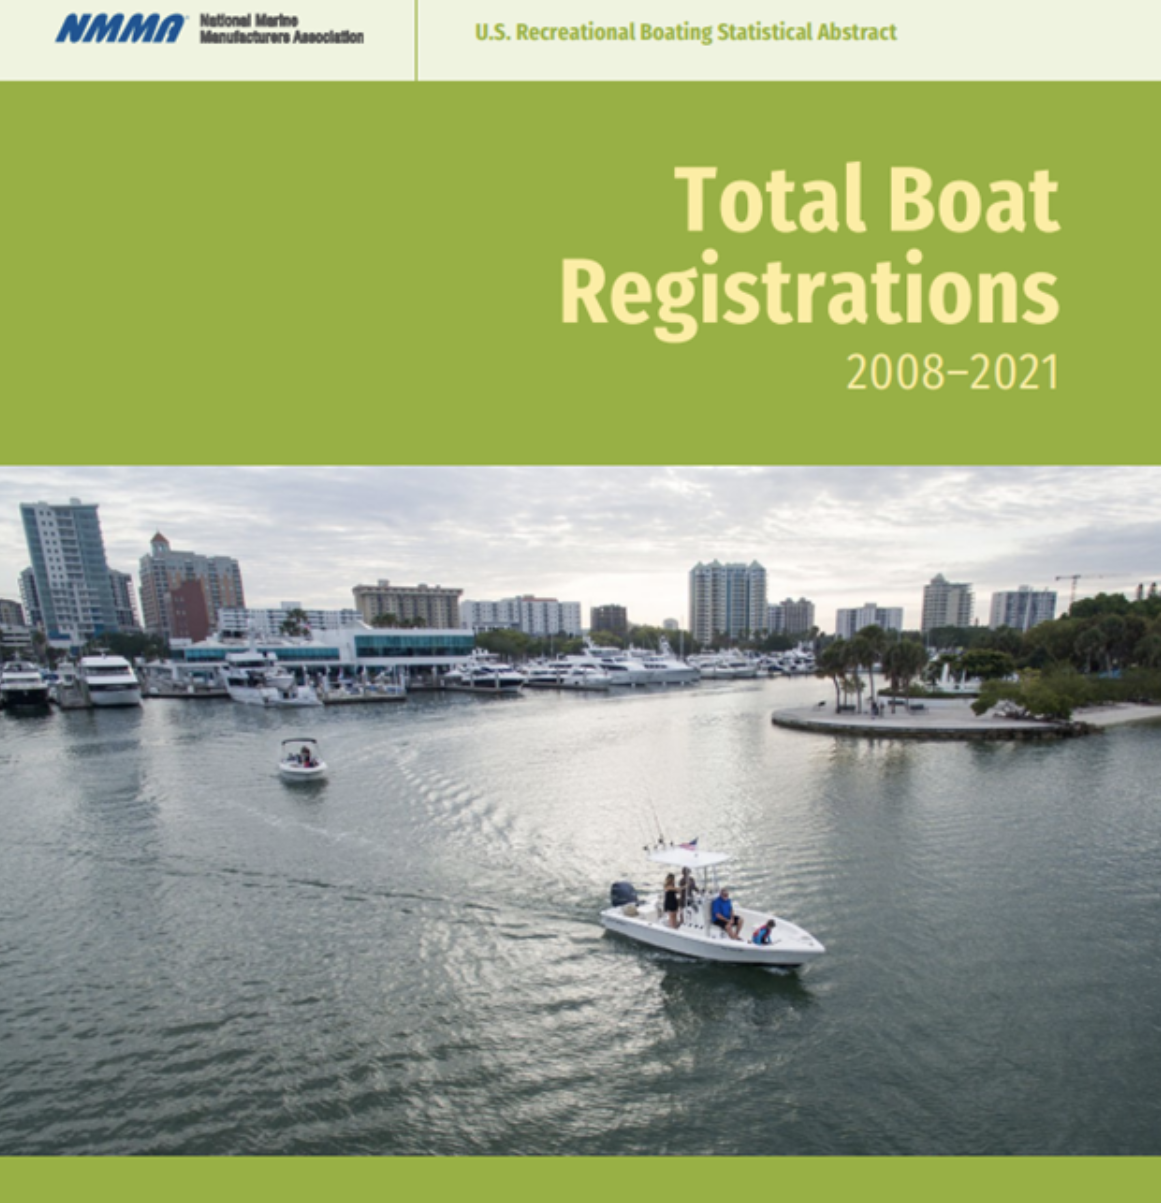 Boating Registration, NMAA, Boating Business, Total Boats